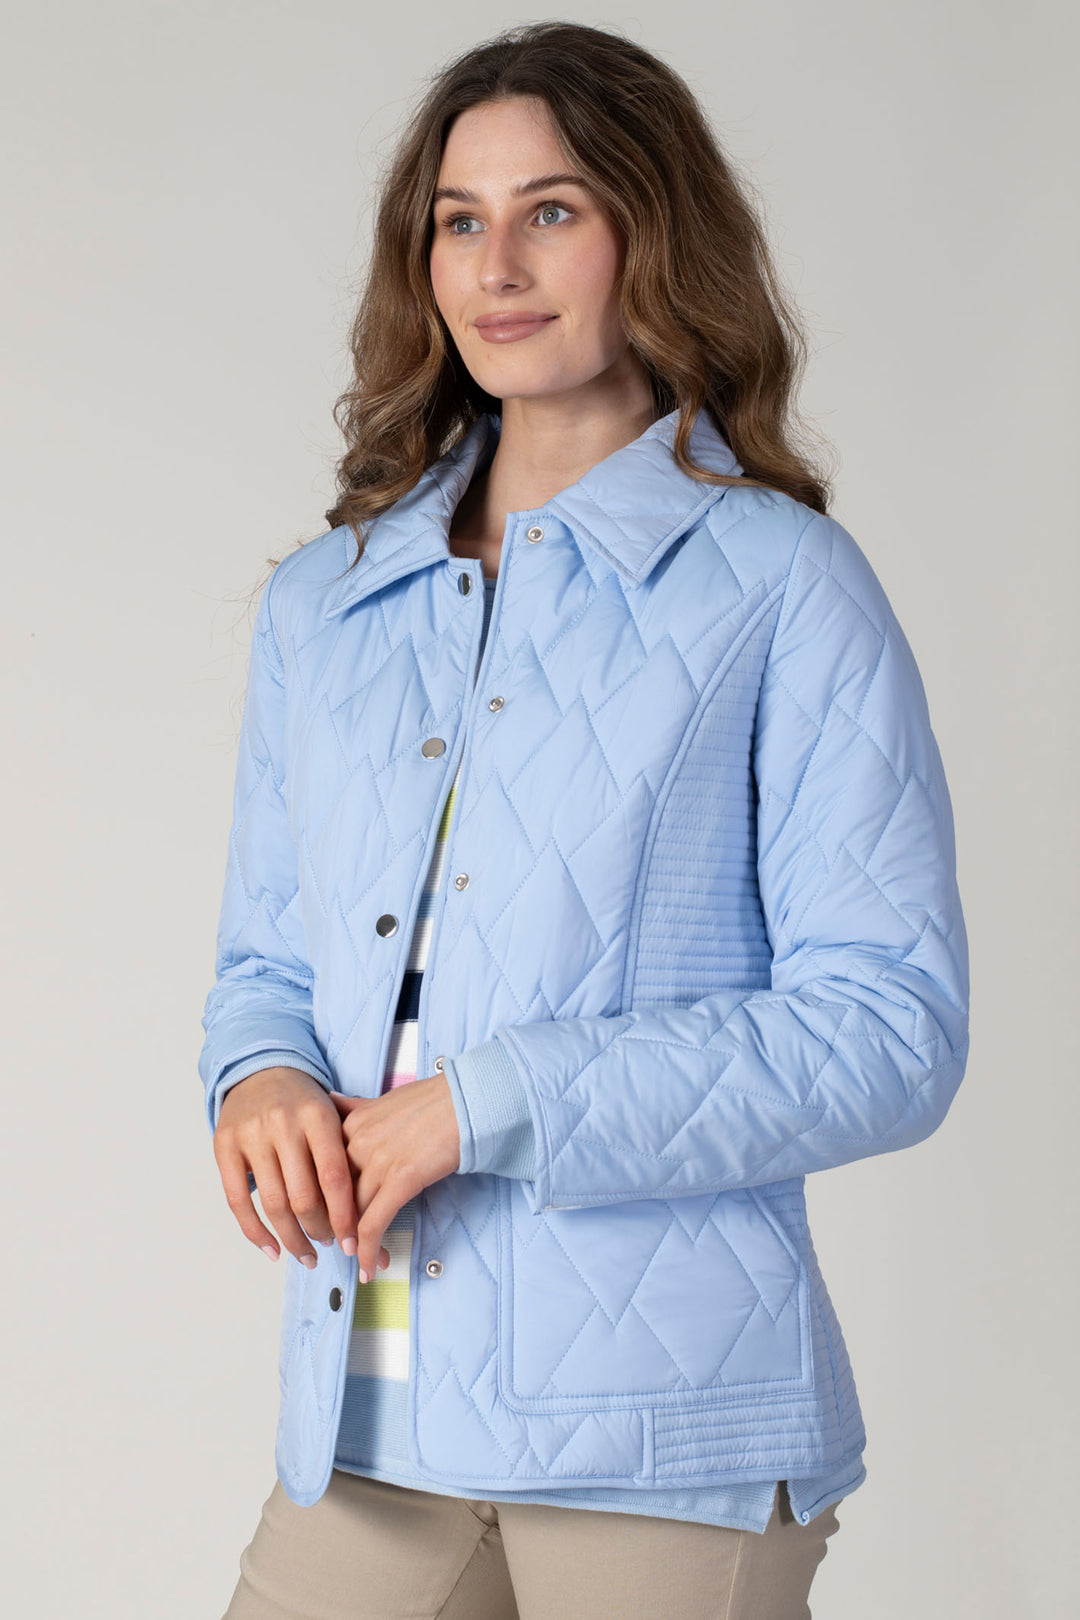 Jessica Graaf 27014 Light Blue Padded Jacket - Experience Boutique